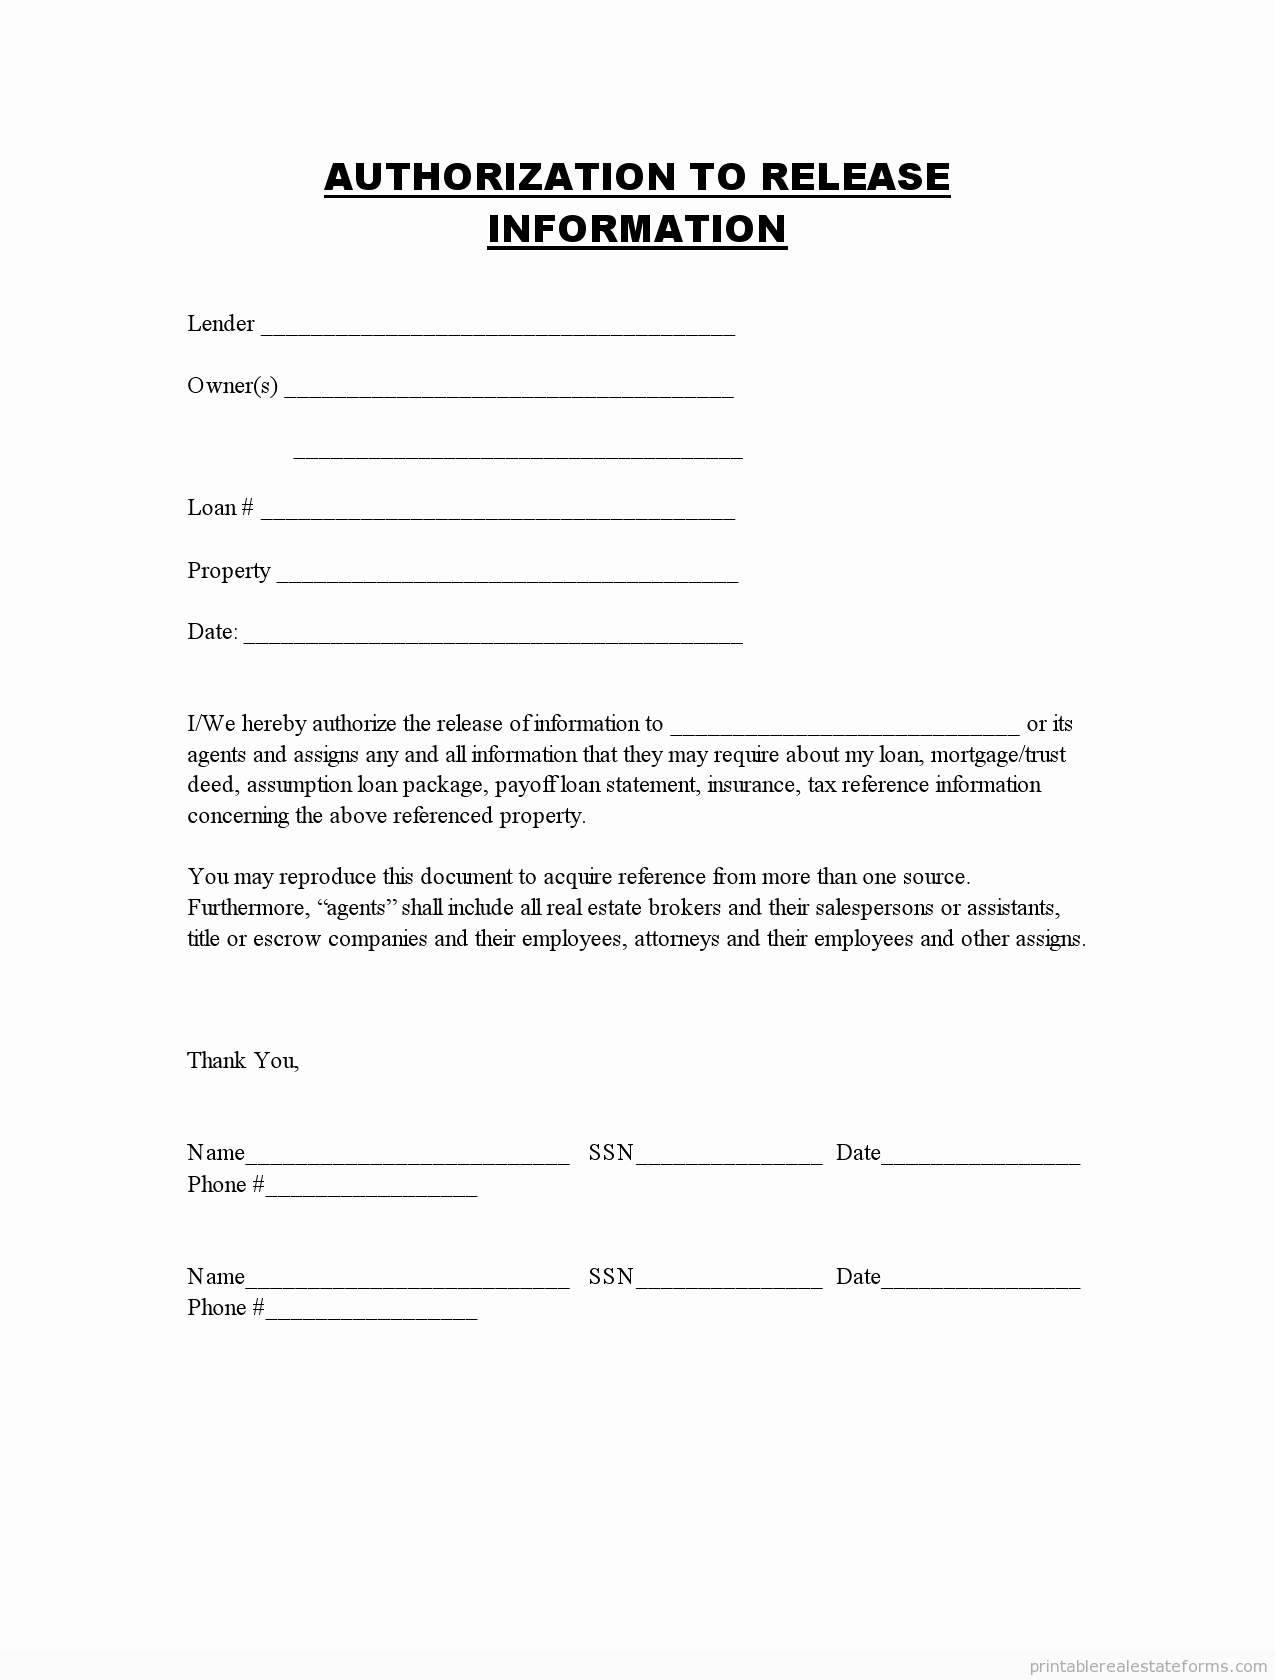 Free General Release form Template Luxury Printable Sample Authorization to Release Information form